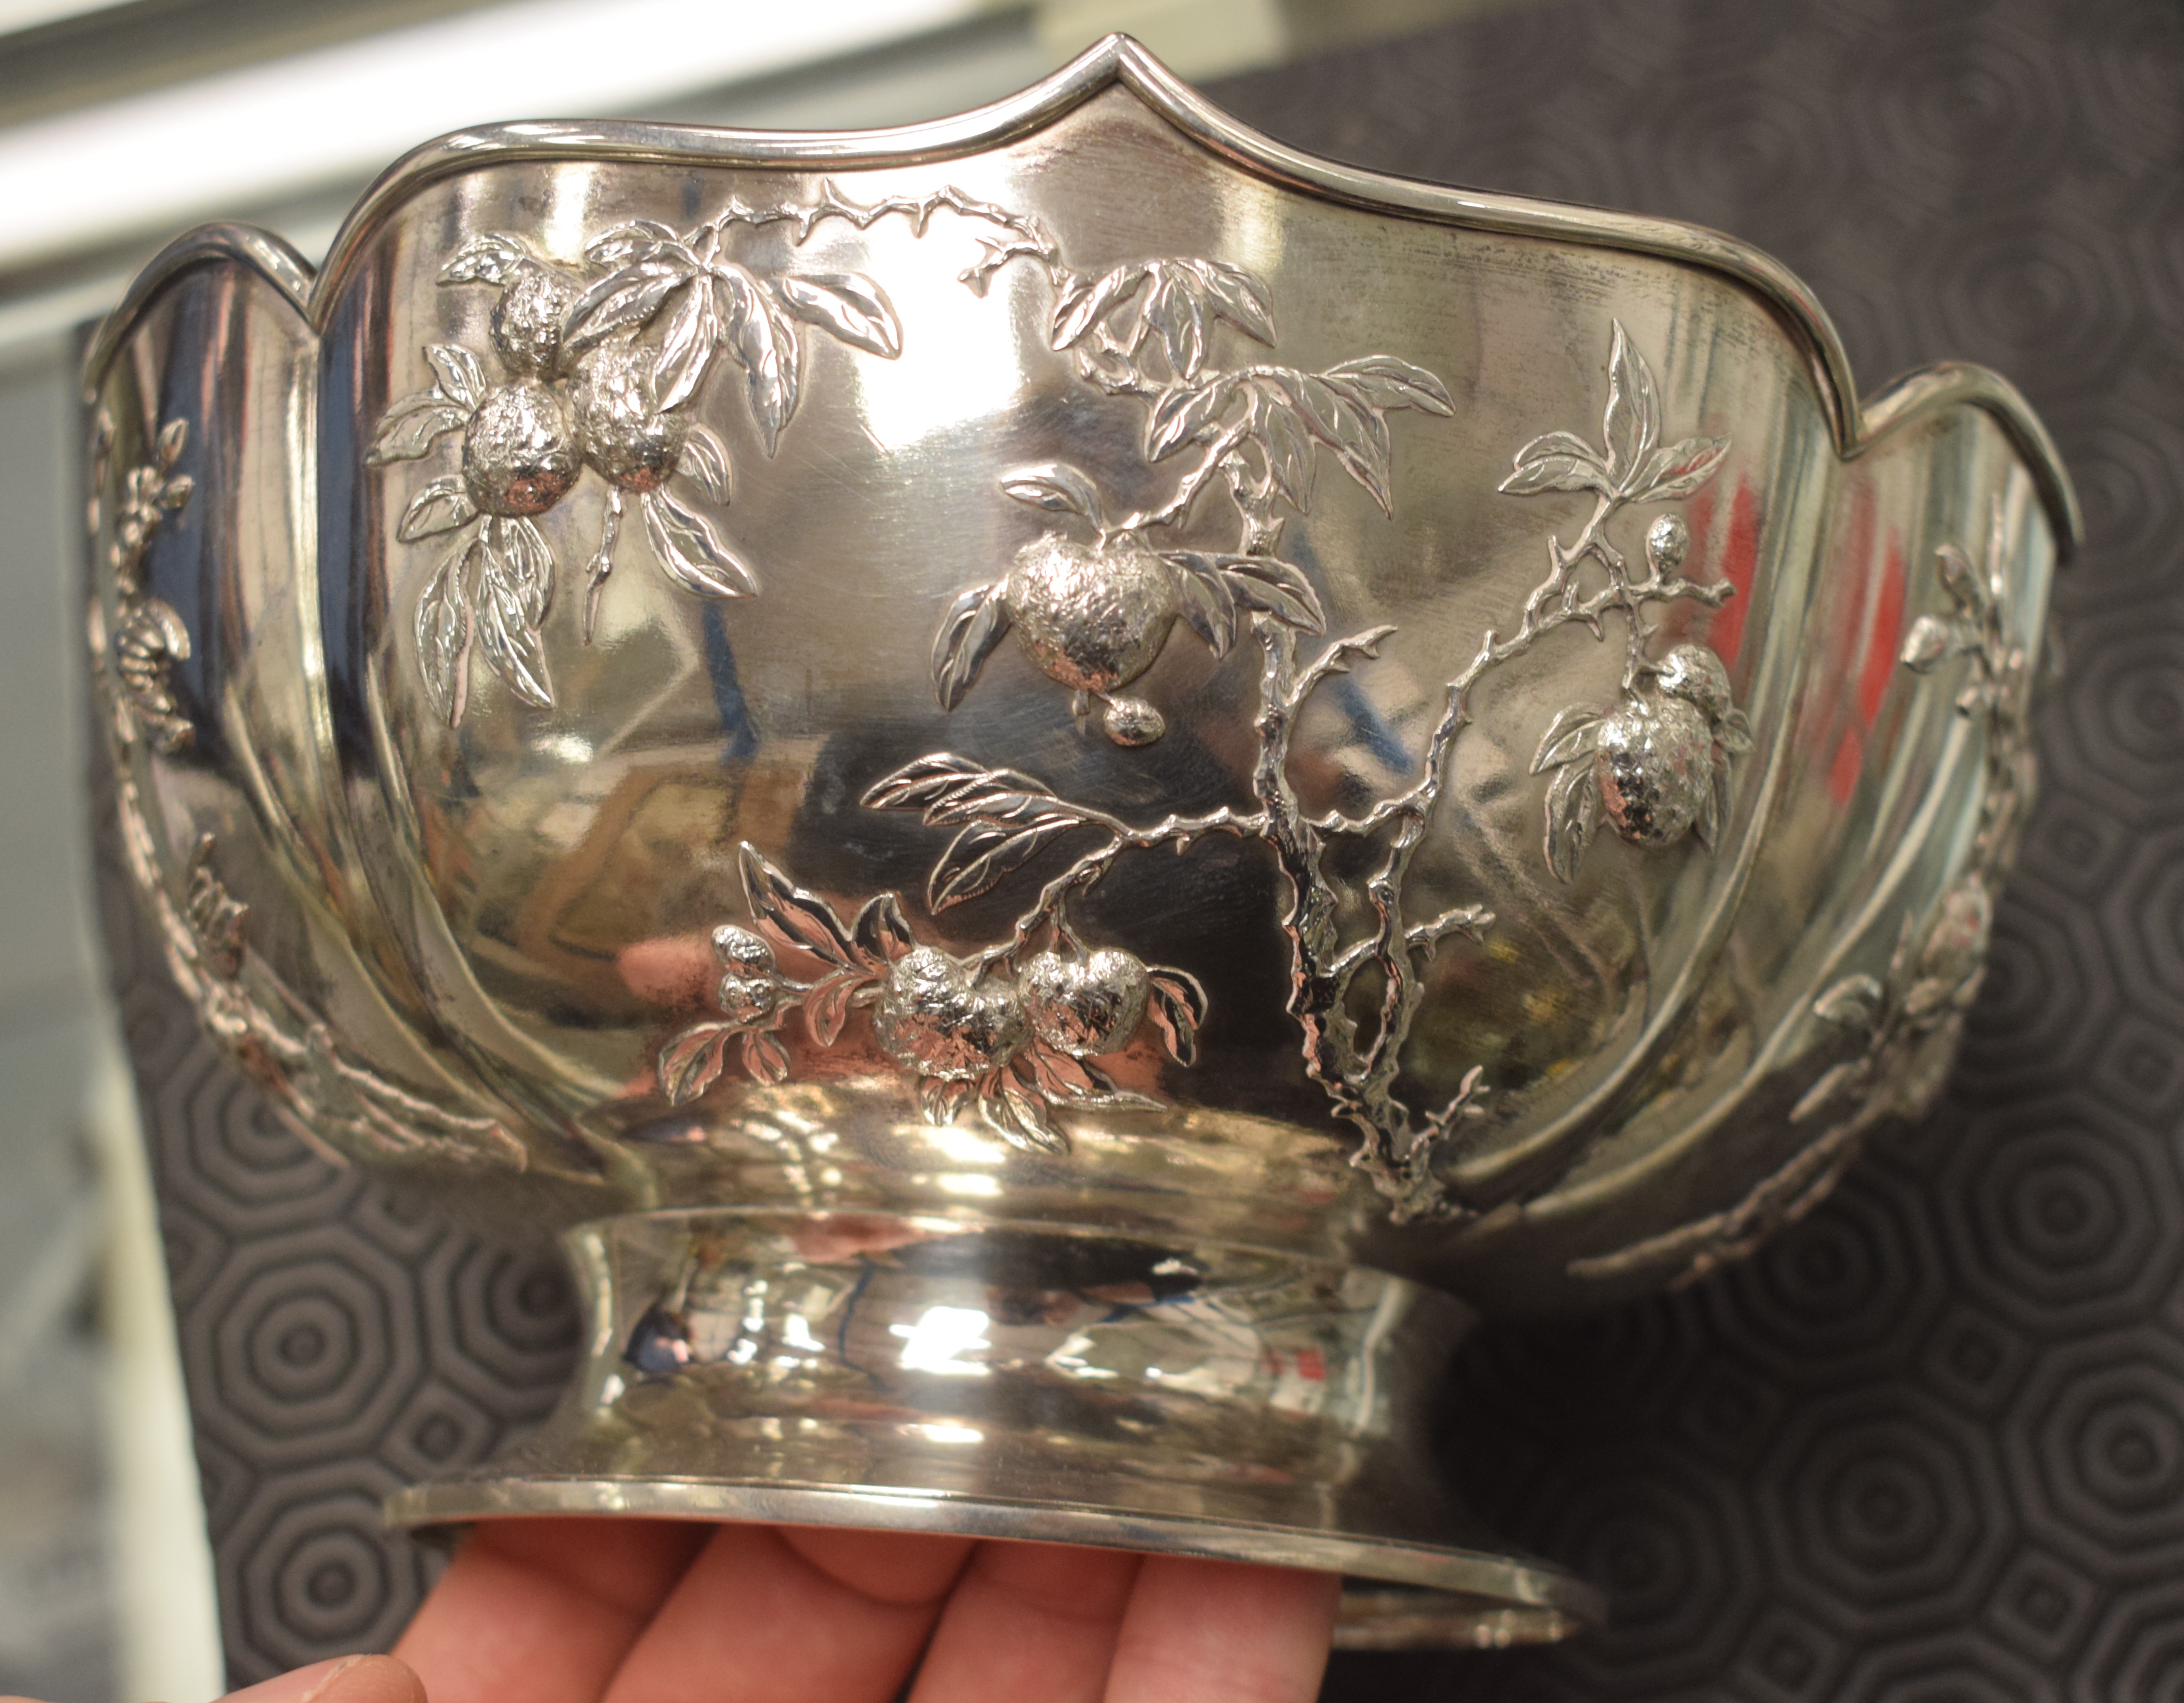 A LATE 19TH CENTURY CHINESE SCALLOPED SILVER BOWL by Zeewo, decorated with foliage and vines. 558 gr - Image 5 of 9